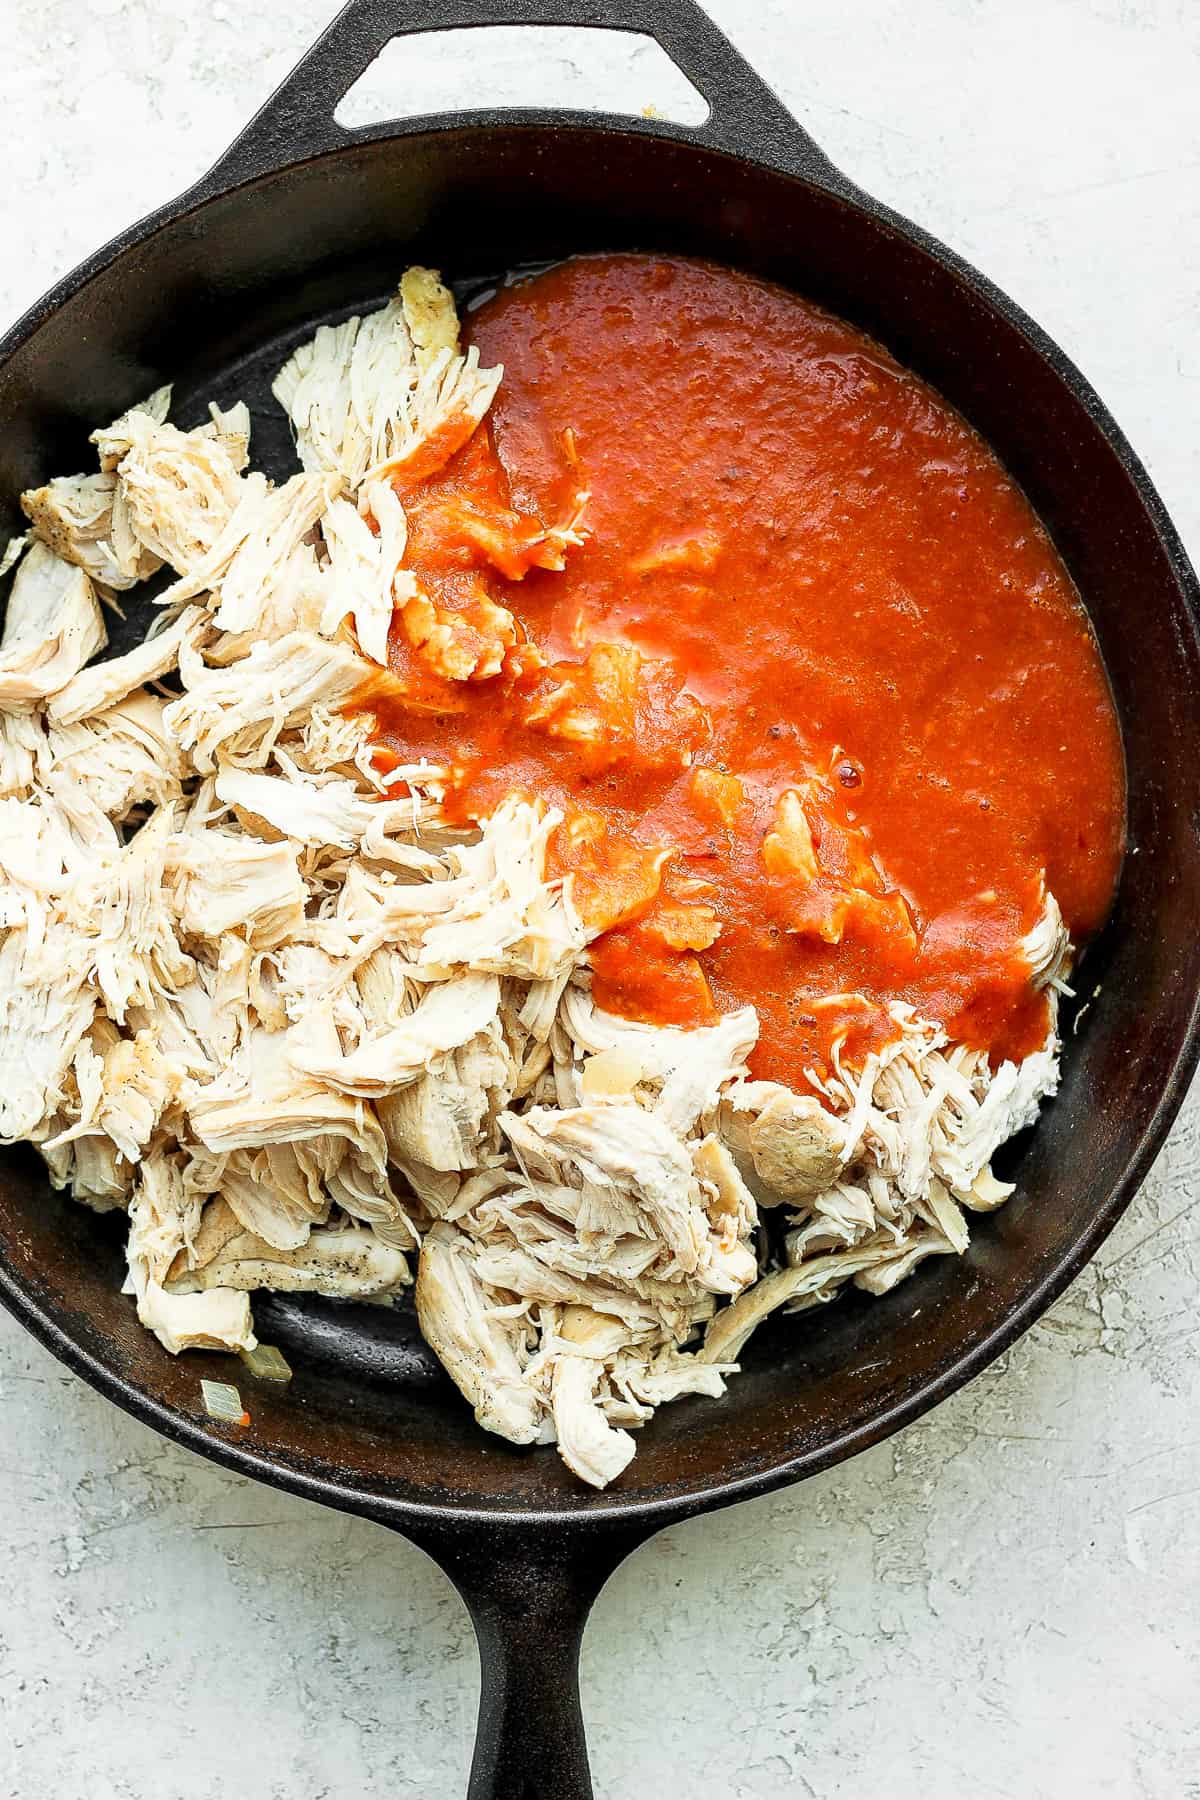 Chicken tinga in a cast iron skillet.